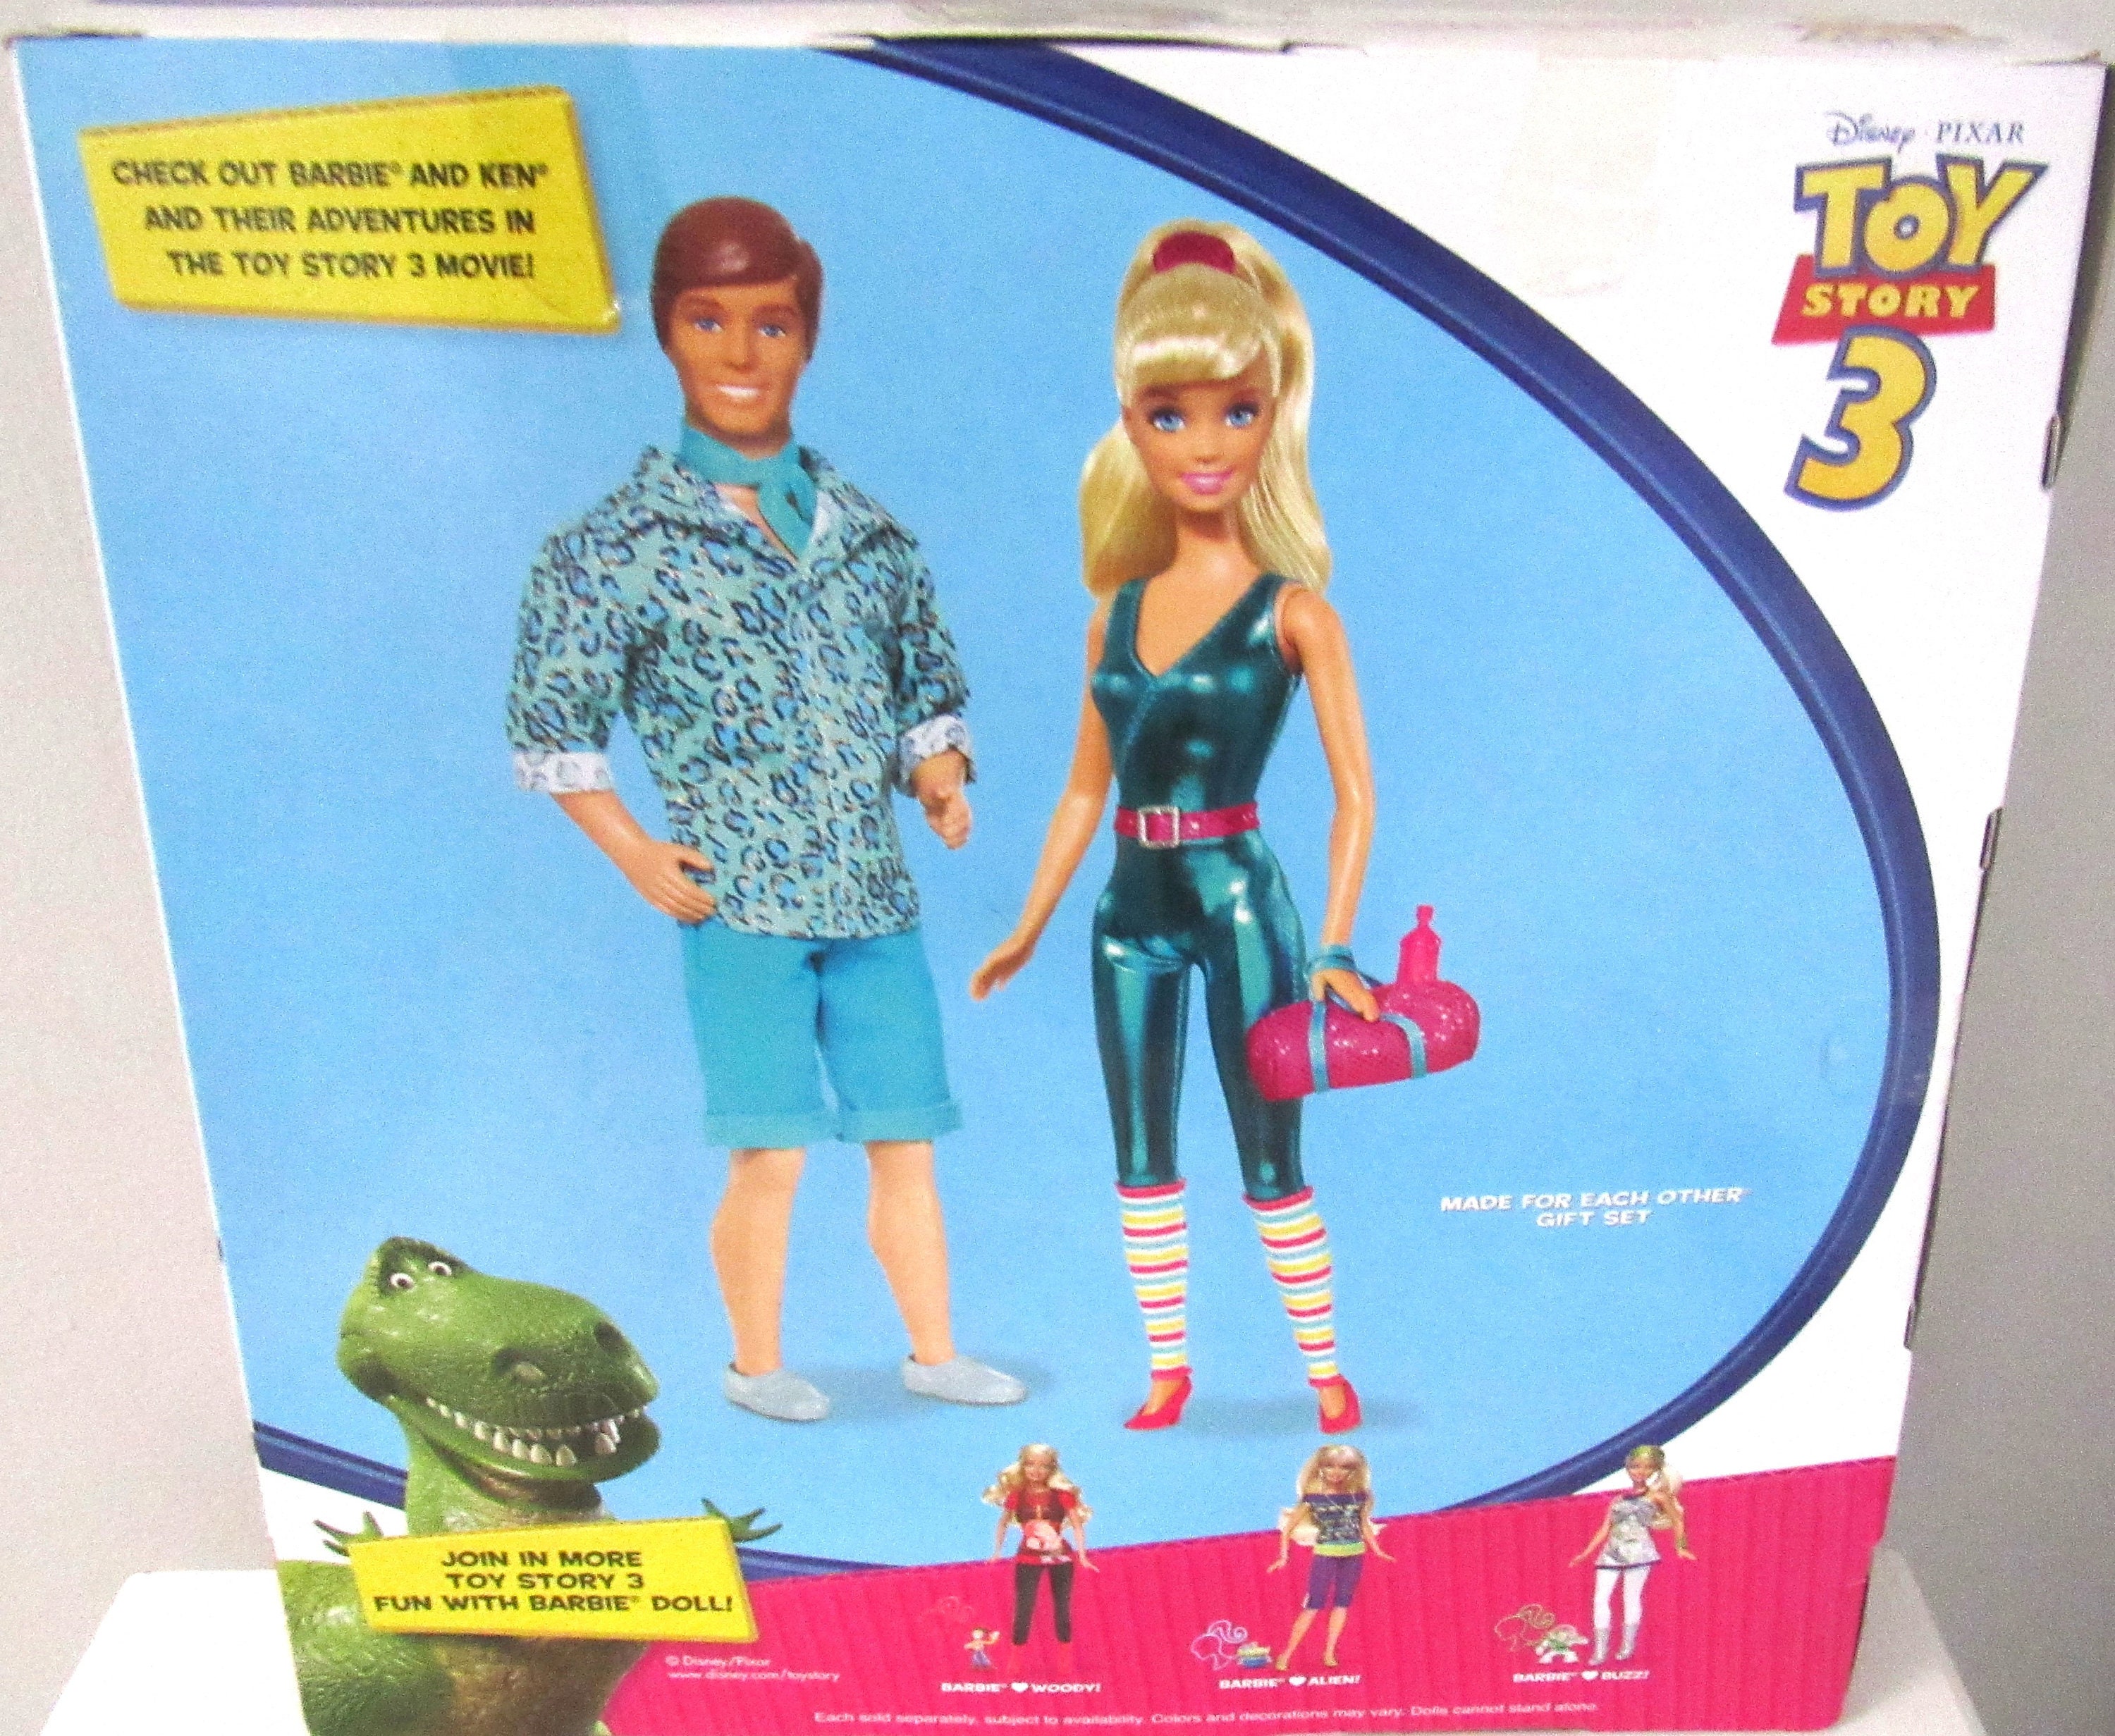 BARBIE AND KEN DOLL SET * MADE FOR EACH OTHER Toy Story 3 Box VHTF